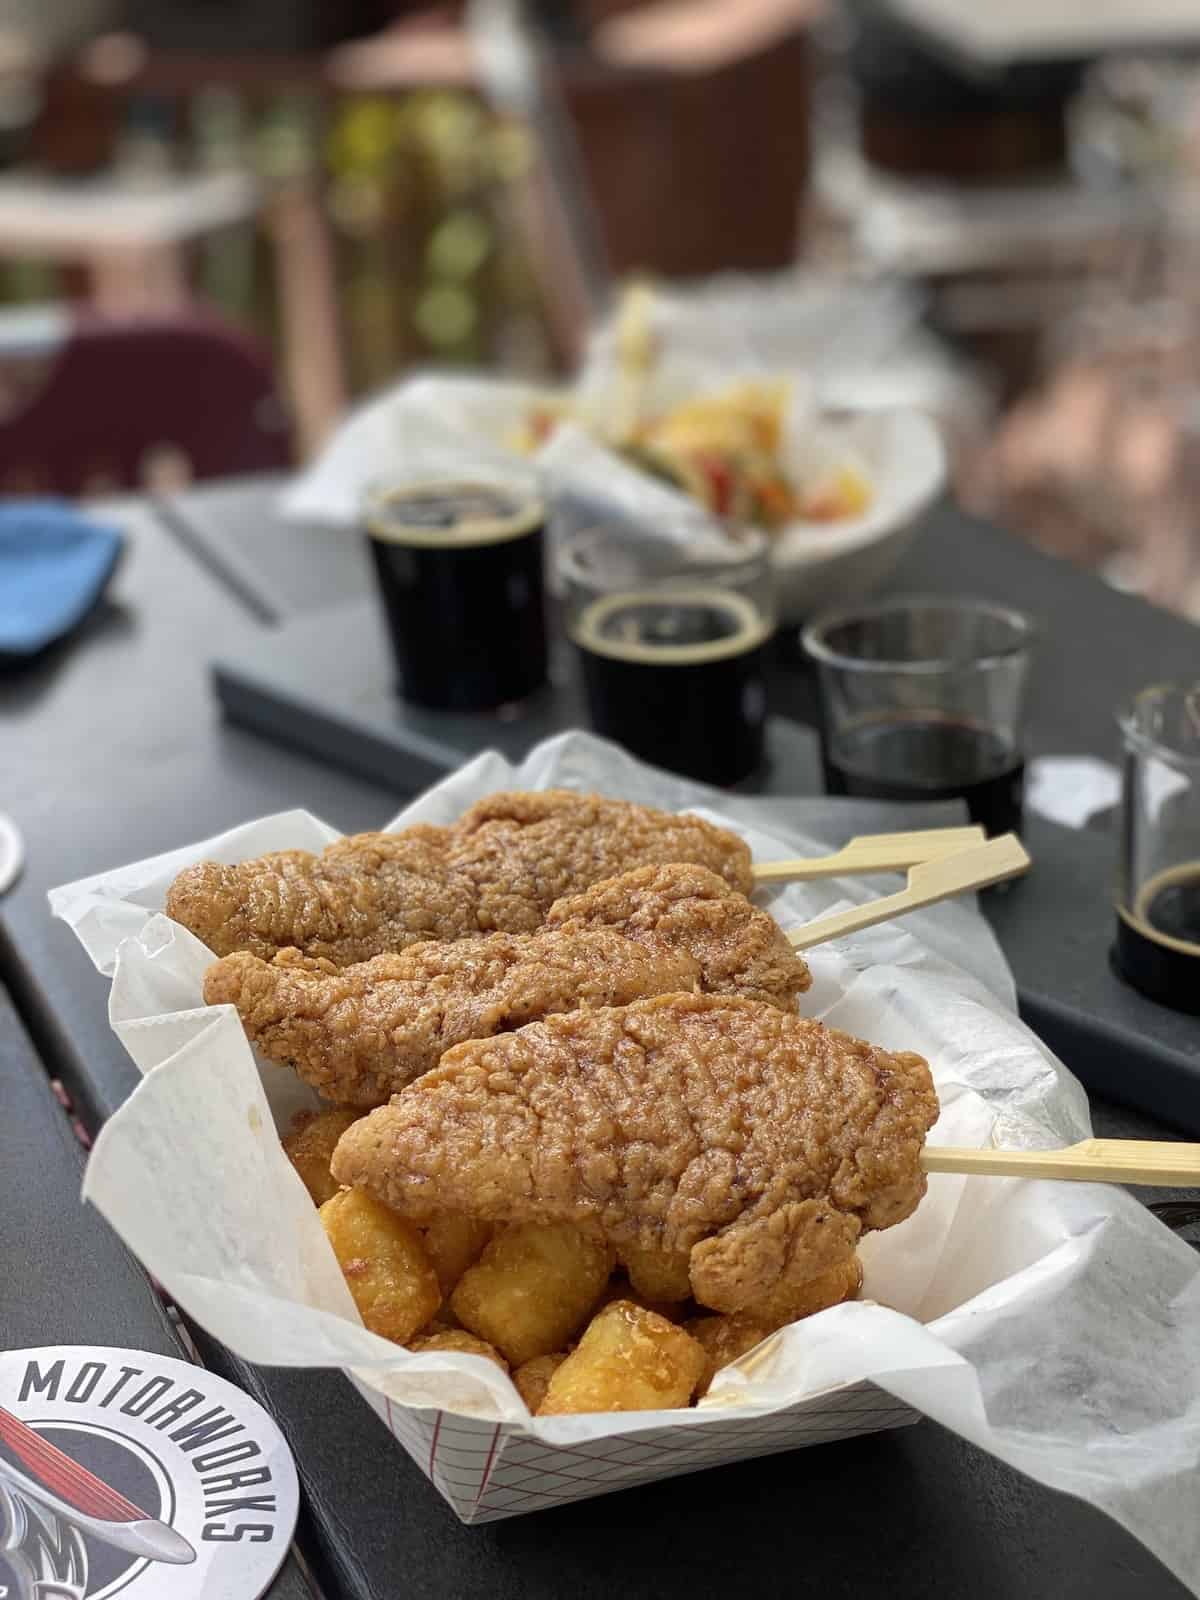 Fried chicken on a stick and tater tots with beer flight in background.